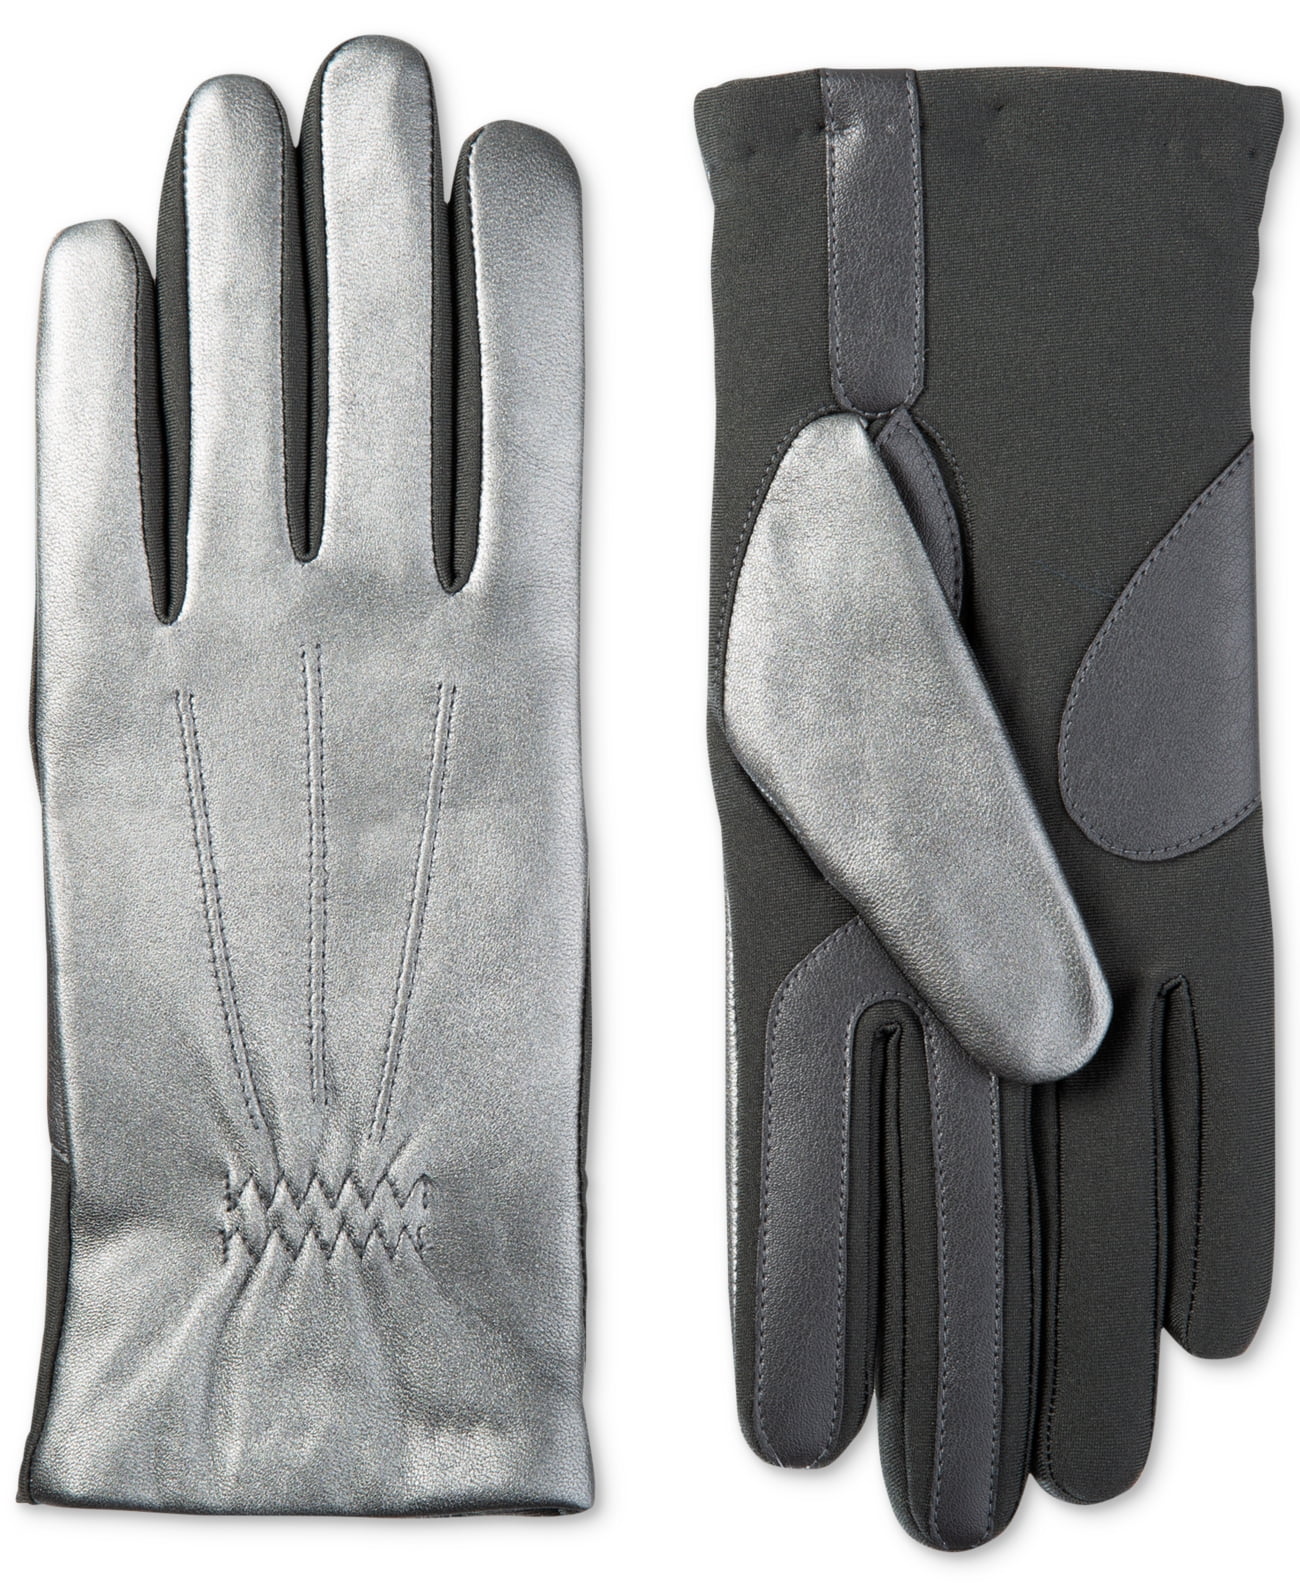 women's leather touchscreen gloves